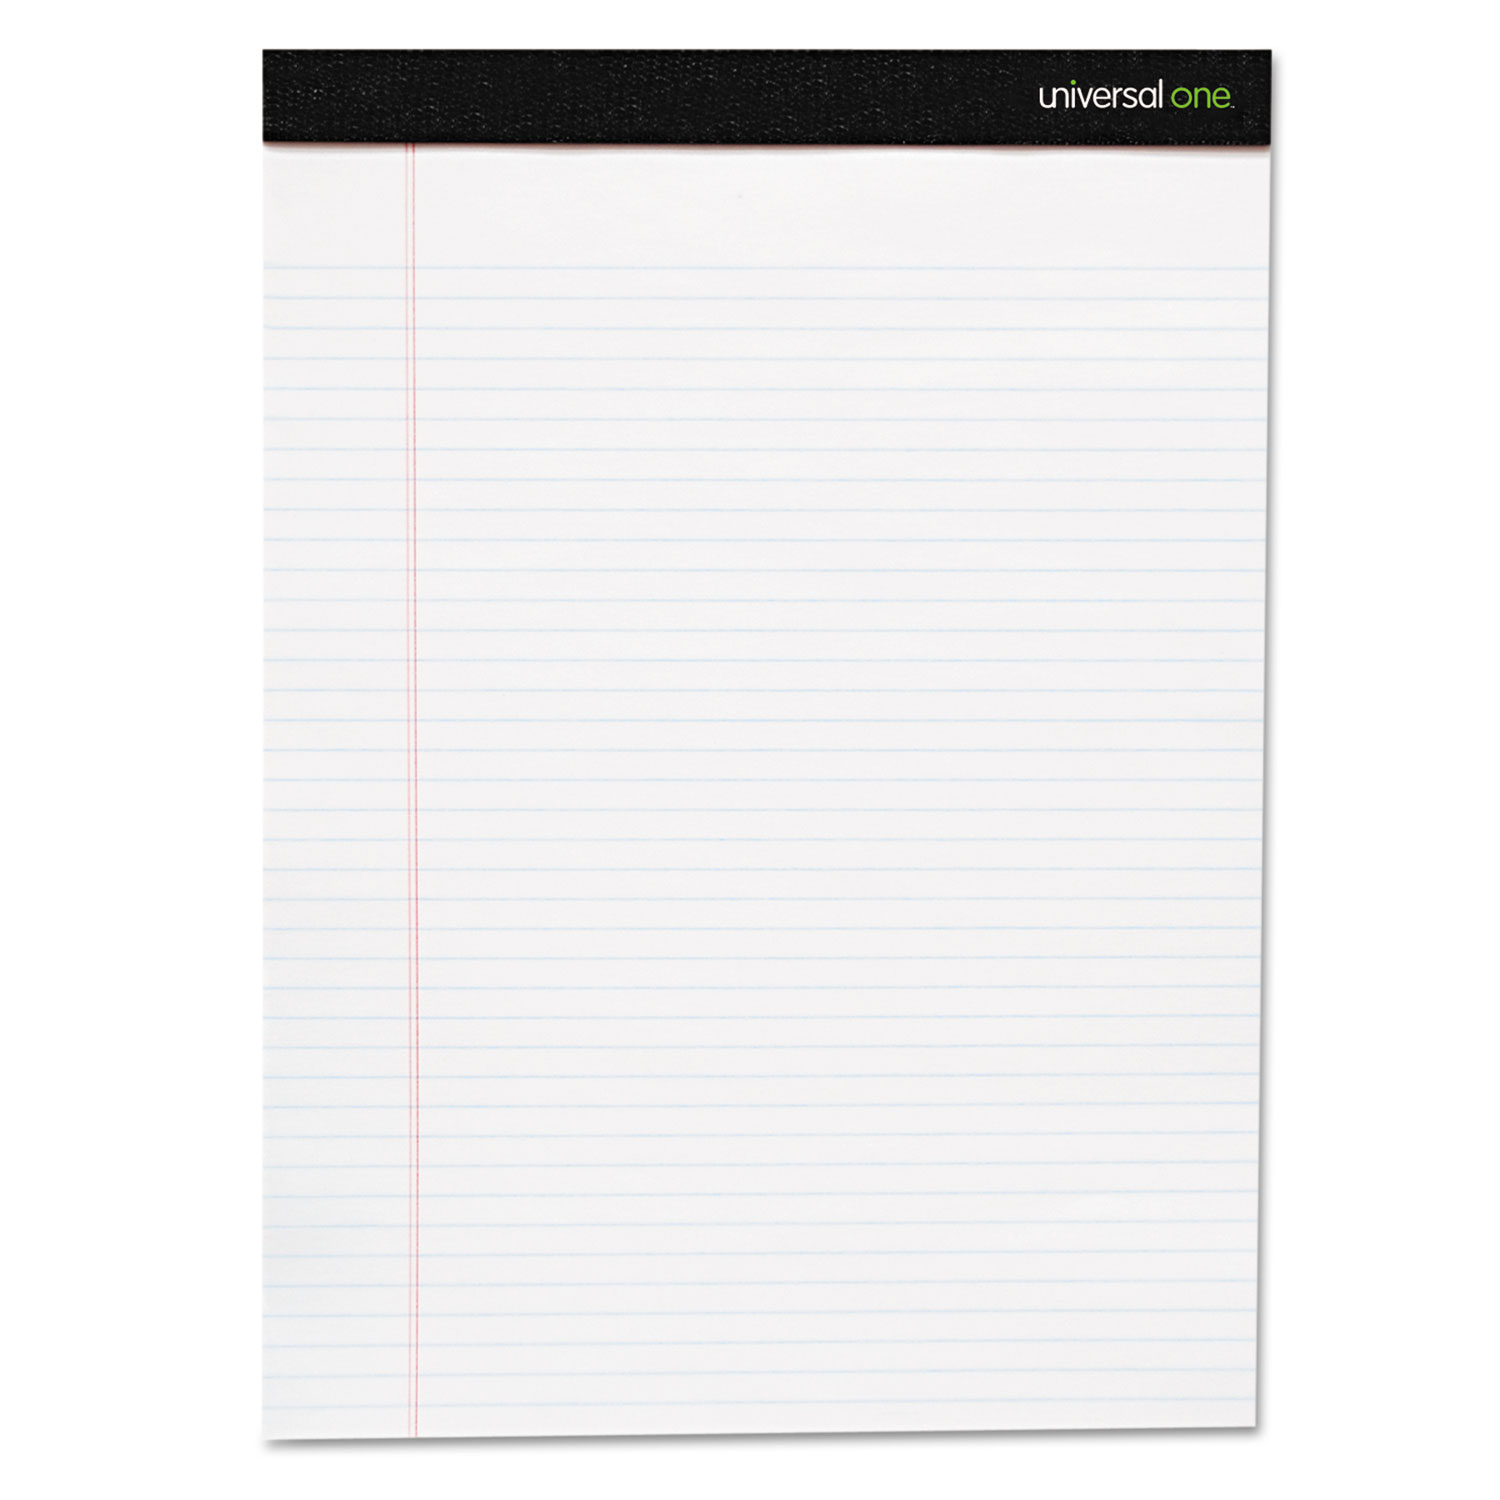  Universal UNV56300 Premium Ruled Writing Pads, Narrow Rule, 5 x 8, White, 50 Sheets, 6/Pack (UNV56300) 